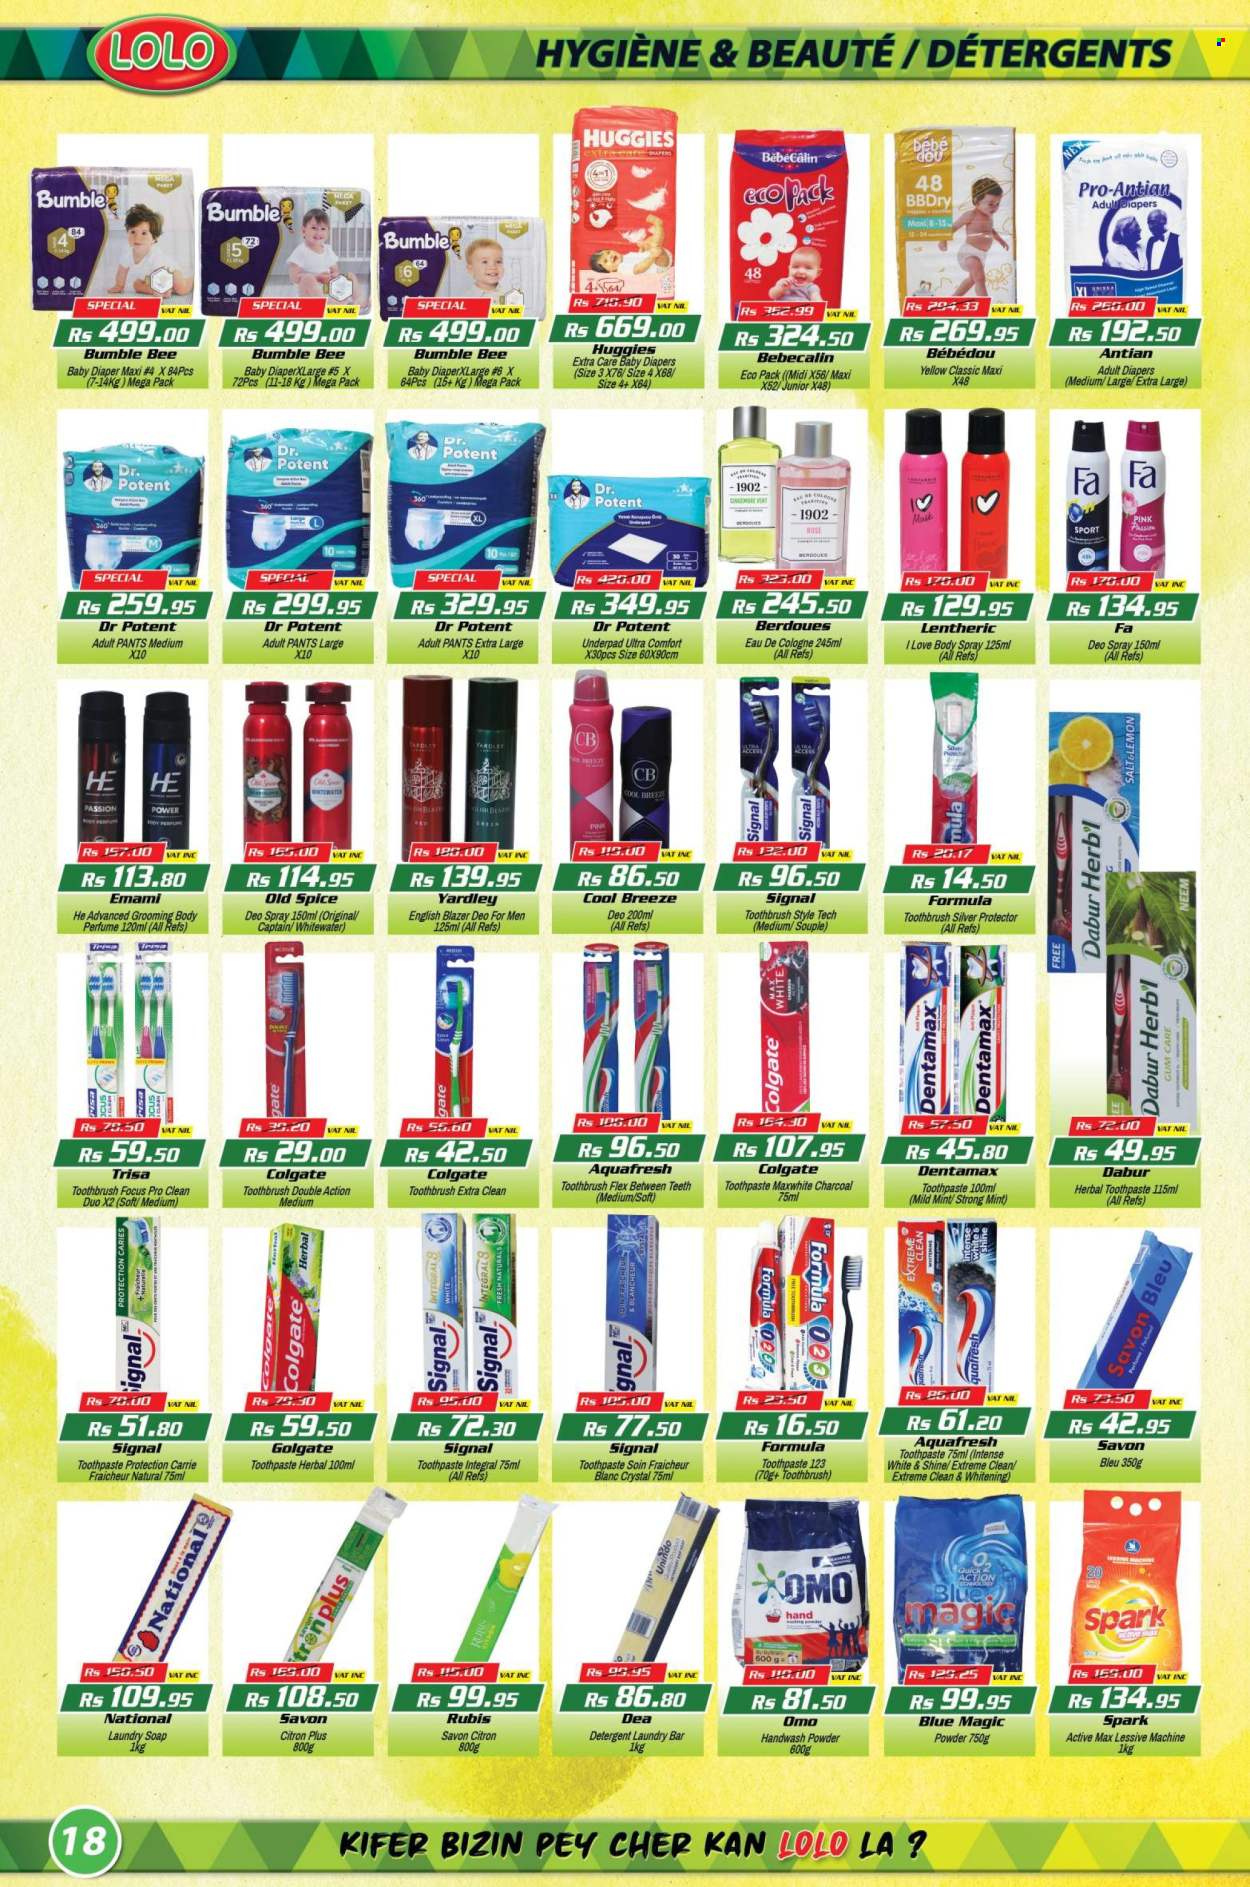 thumbnail - LOLO Hyper Catalogue - 27.04.2024 - 15.05.2024 - Sales products - lemons, Bumble Bee, Dabur, cloves, pants, nappies, detergent, Omo, laundry powder, laundry soap bar, handwash powder, hand wash, toothbrush, toothpaste, Signal, body spray, cologne, English Blazer, Yardley, Lenthéric, deodorant, Colgate, Huggies, Old Spice. Page 18.